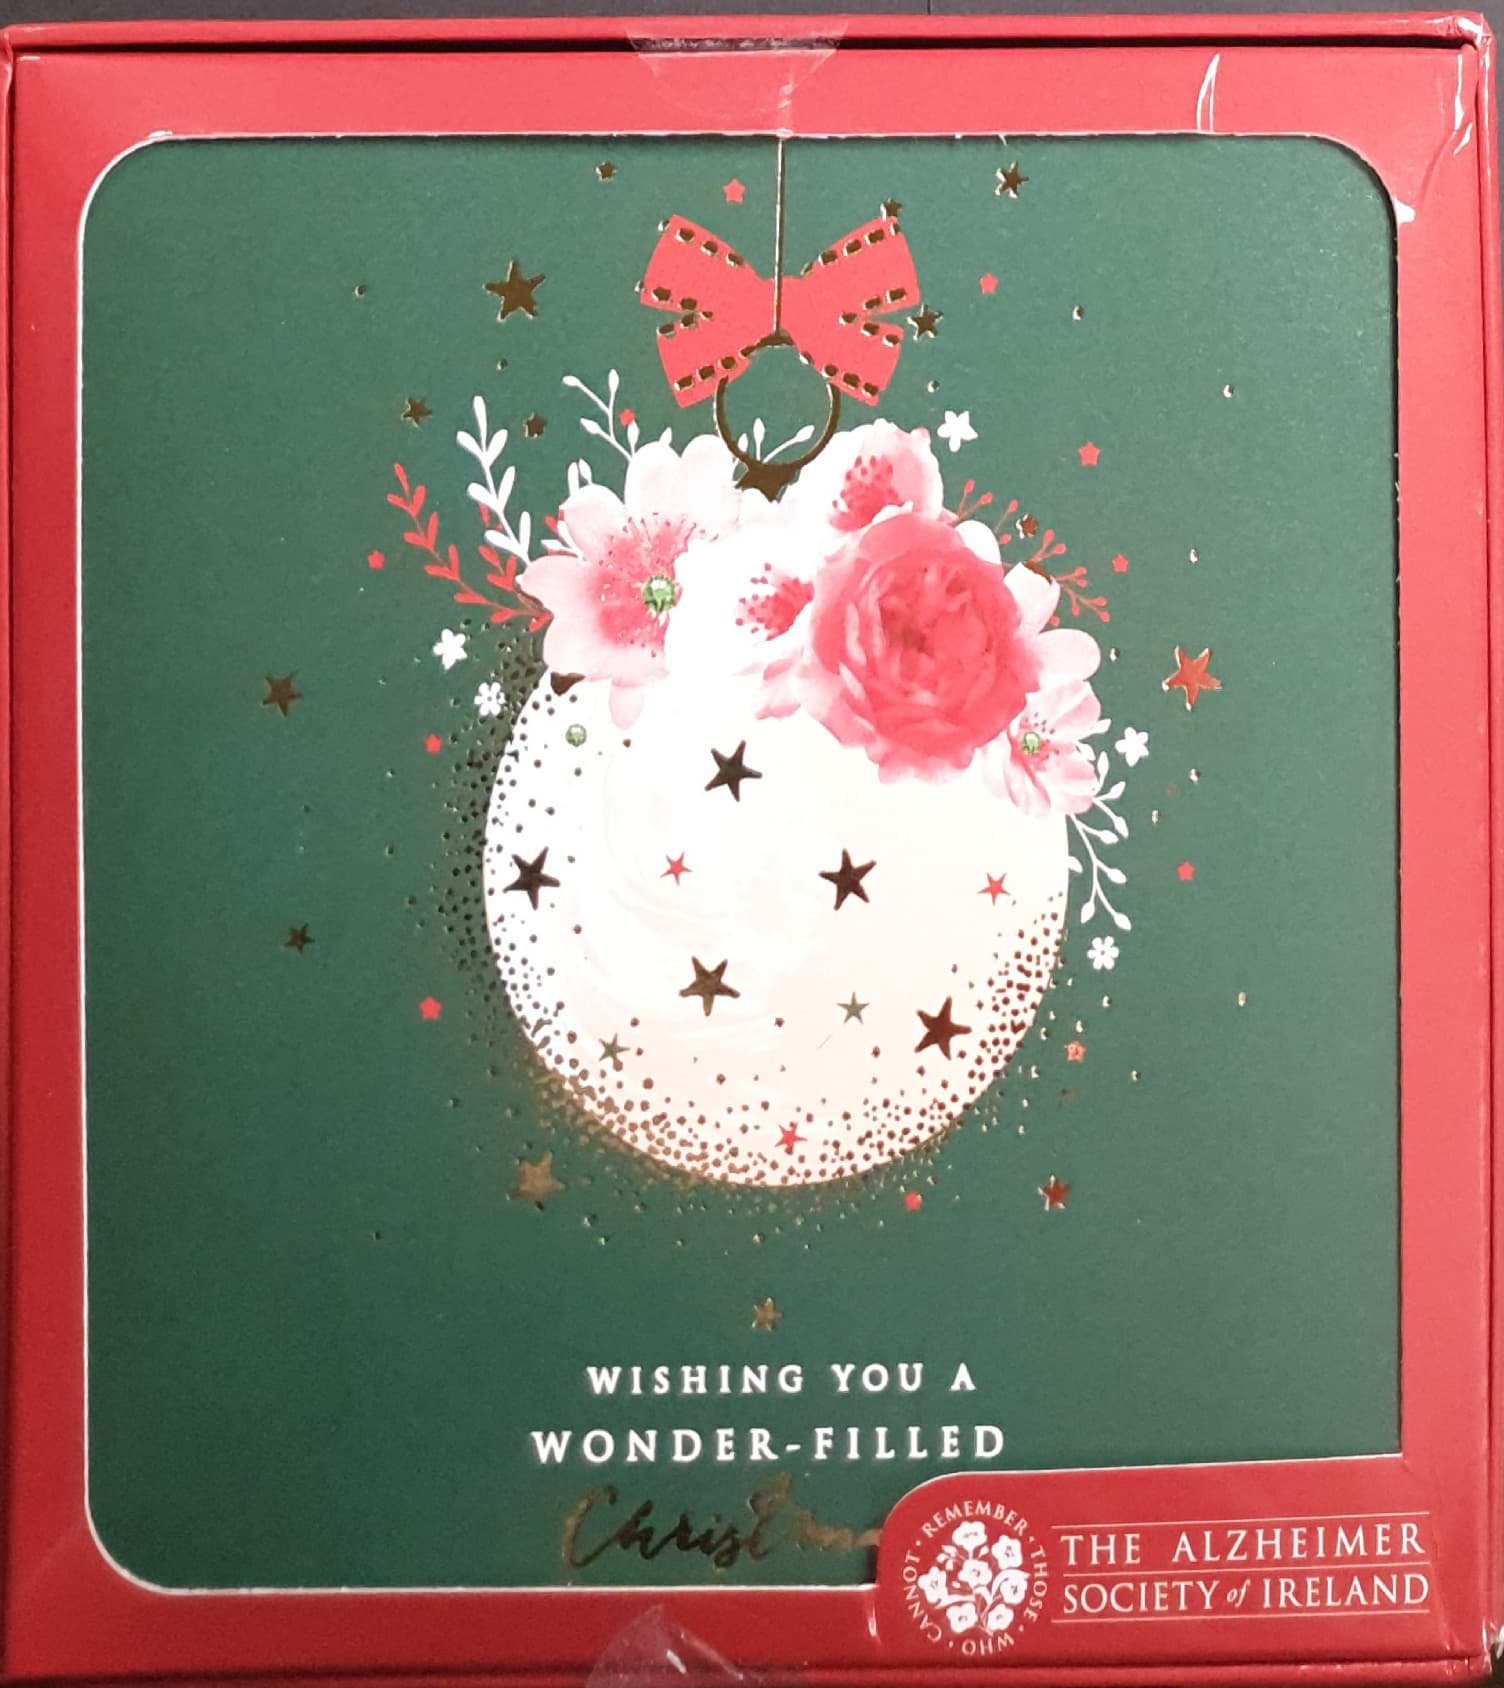 Charity Christmas Card (In Irish & English) - Box of 16 / Alzheimer Society of Ireland - White Bauble with Pink Roses